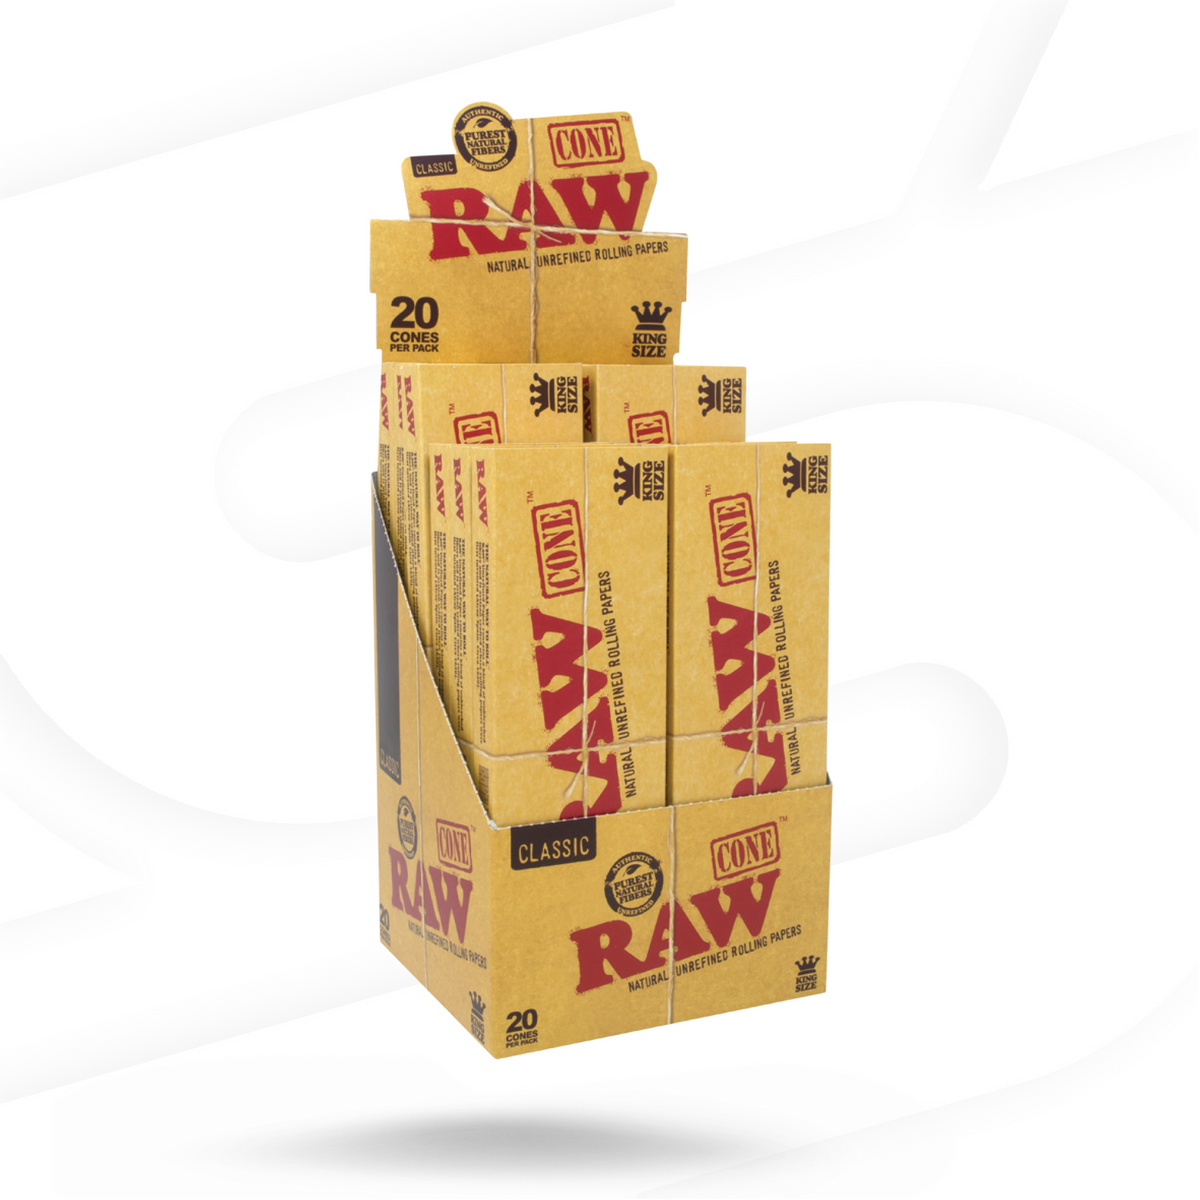 RAW Classic King Size Cones - 20 Pack RAW Cones RAWB-CNCL-KS04_1/40 esd-official